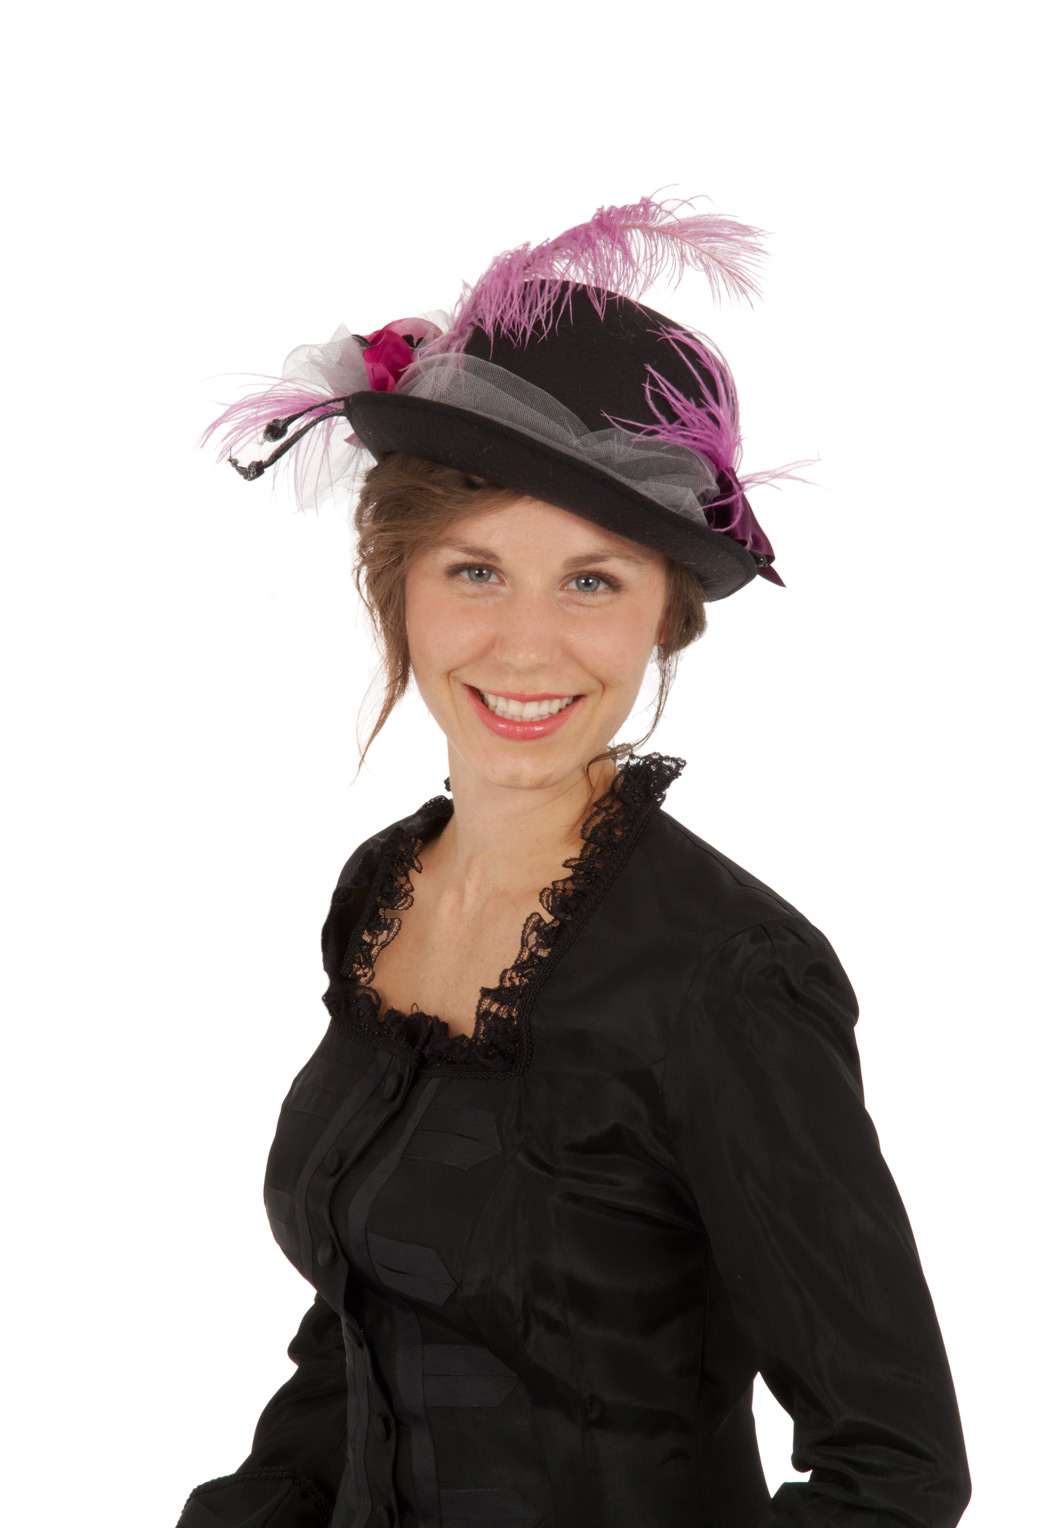 fashionable hats for women